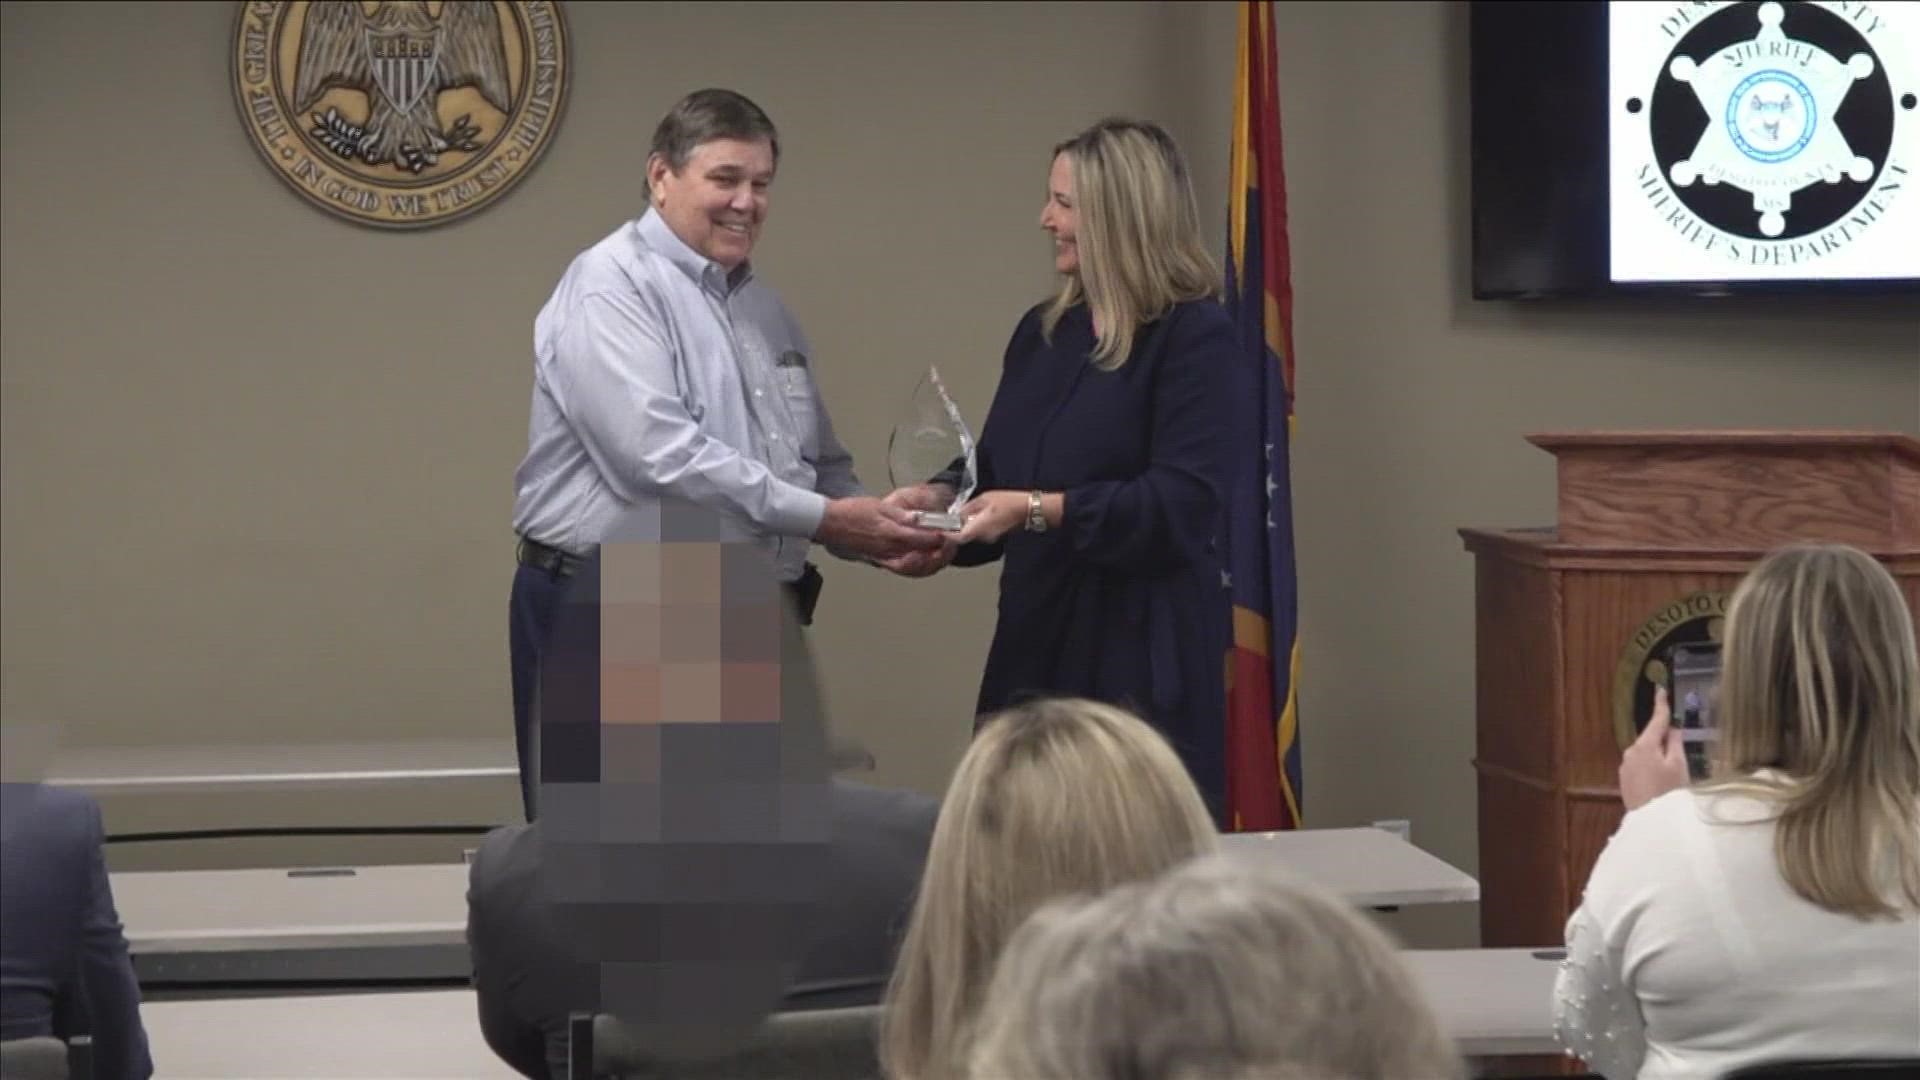 The Center for Violence Prevention honored the department Wednesday, Jan. 11, 2023, for “going above and beyond” in fighting trafficking.